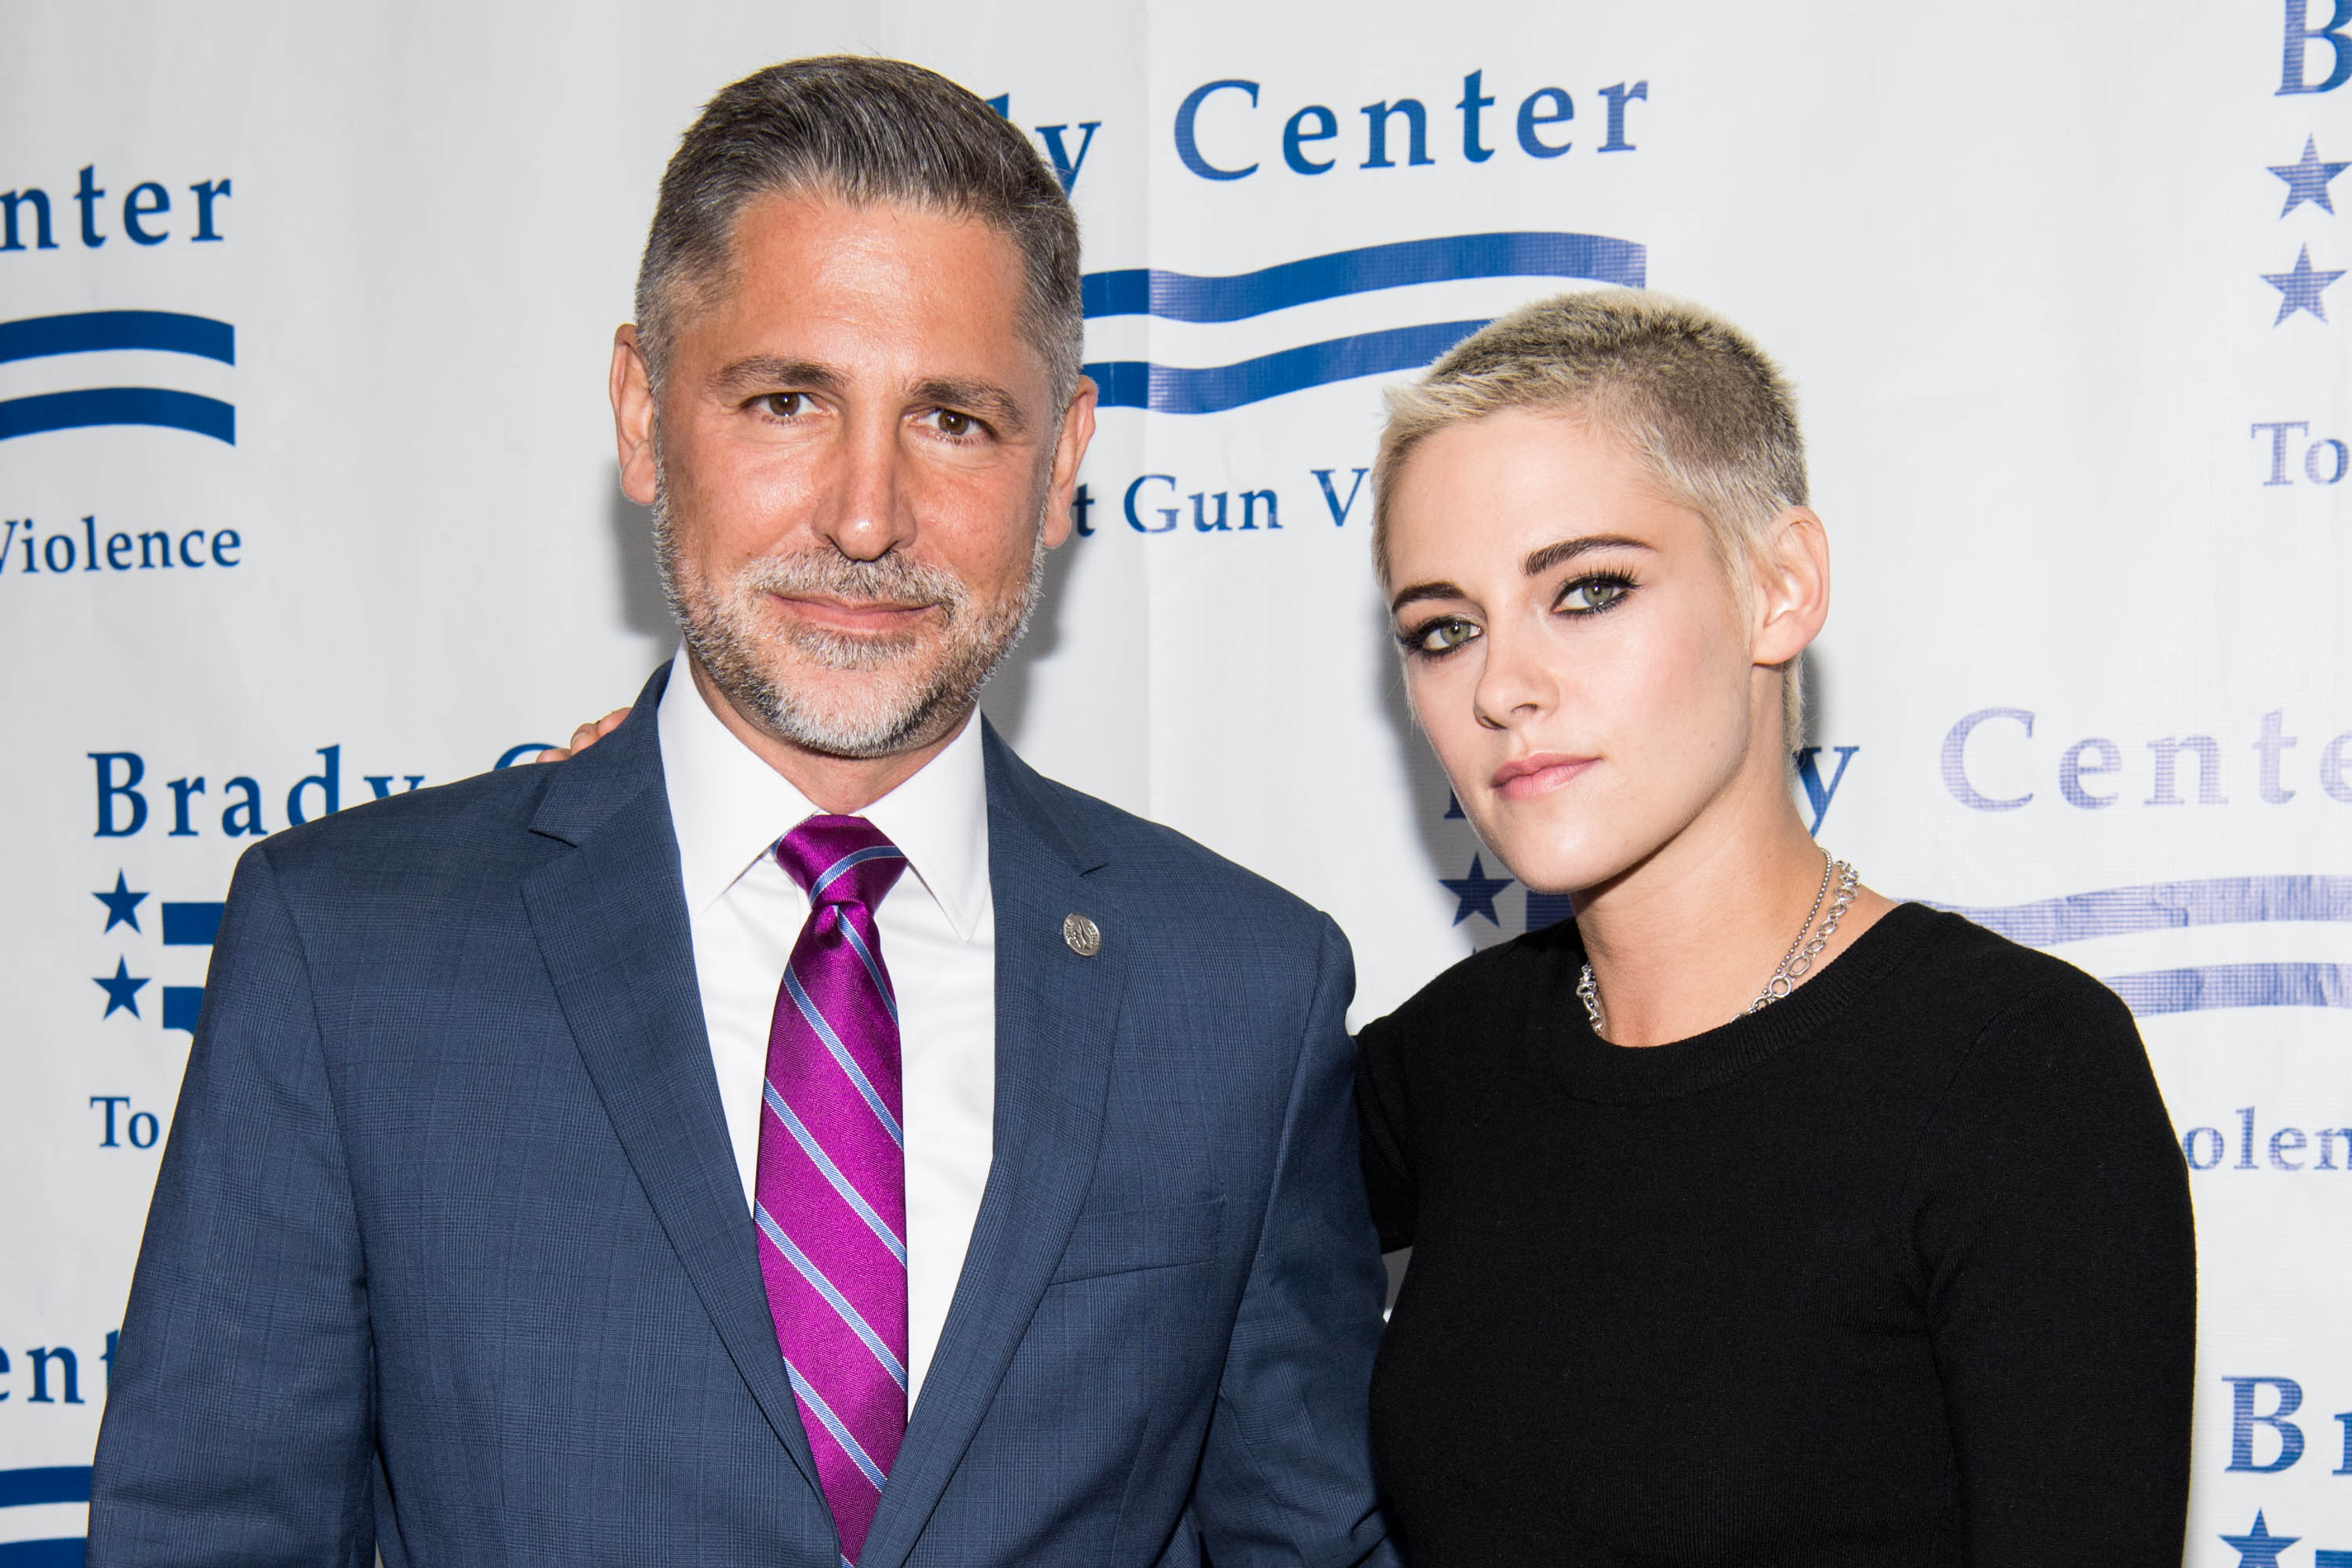 LOS ANGELES, CA - JUNE 07: President of the Brady Center Dan Gross (L) and actress Kristen Stewart attend the Brady Center's Bear Awards Gala at NeueHouse Hollywood on June 7, 2017 in Los Angeles, California. (Photo by Emma McIntyre/Getty Images)